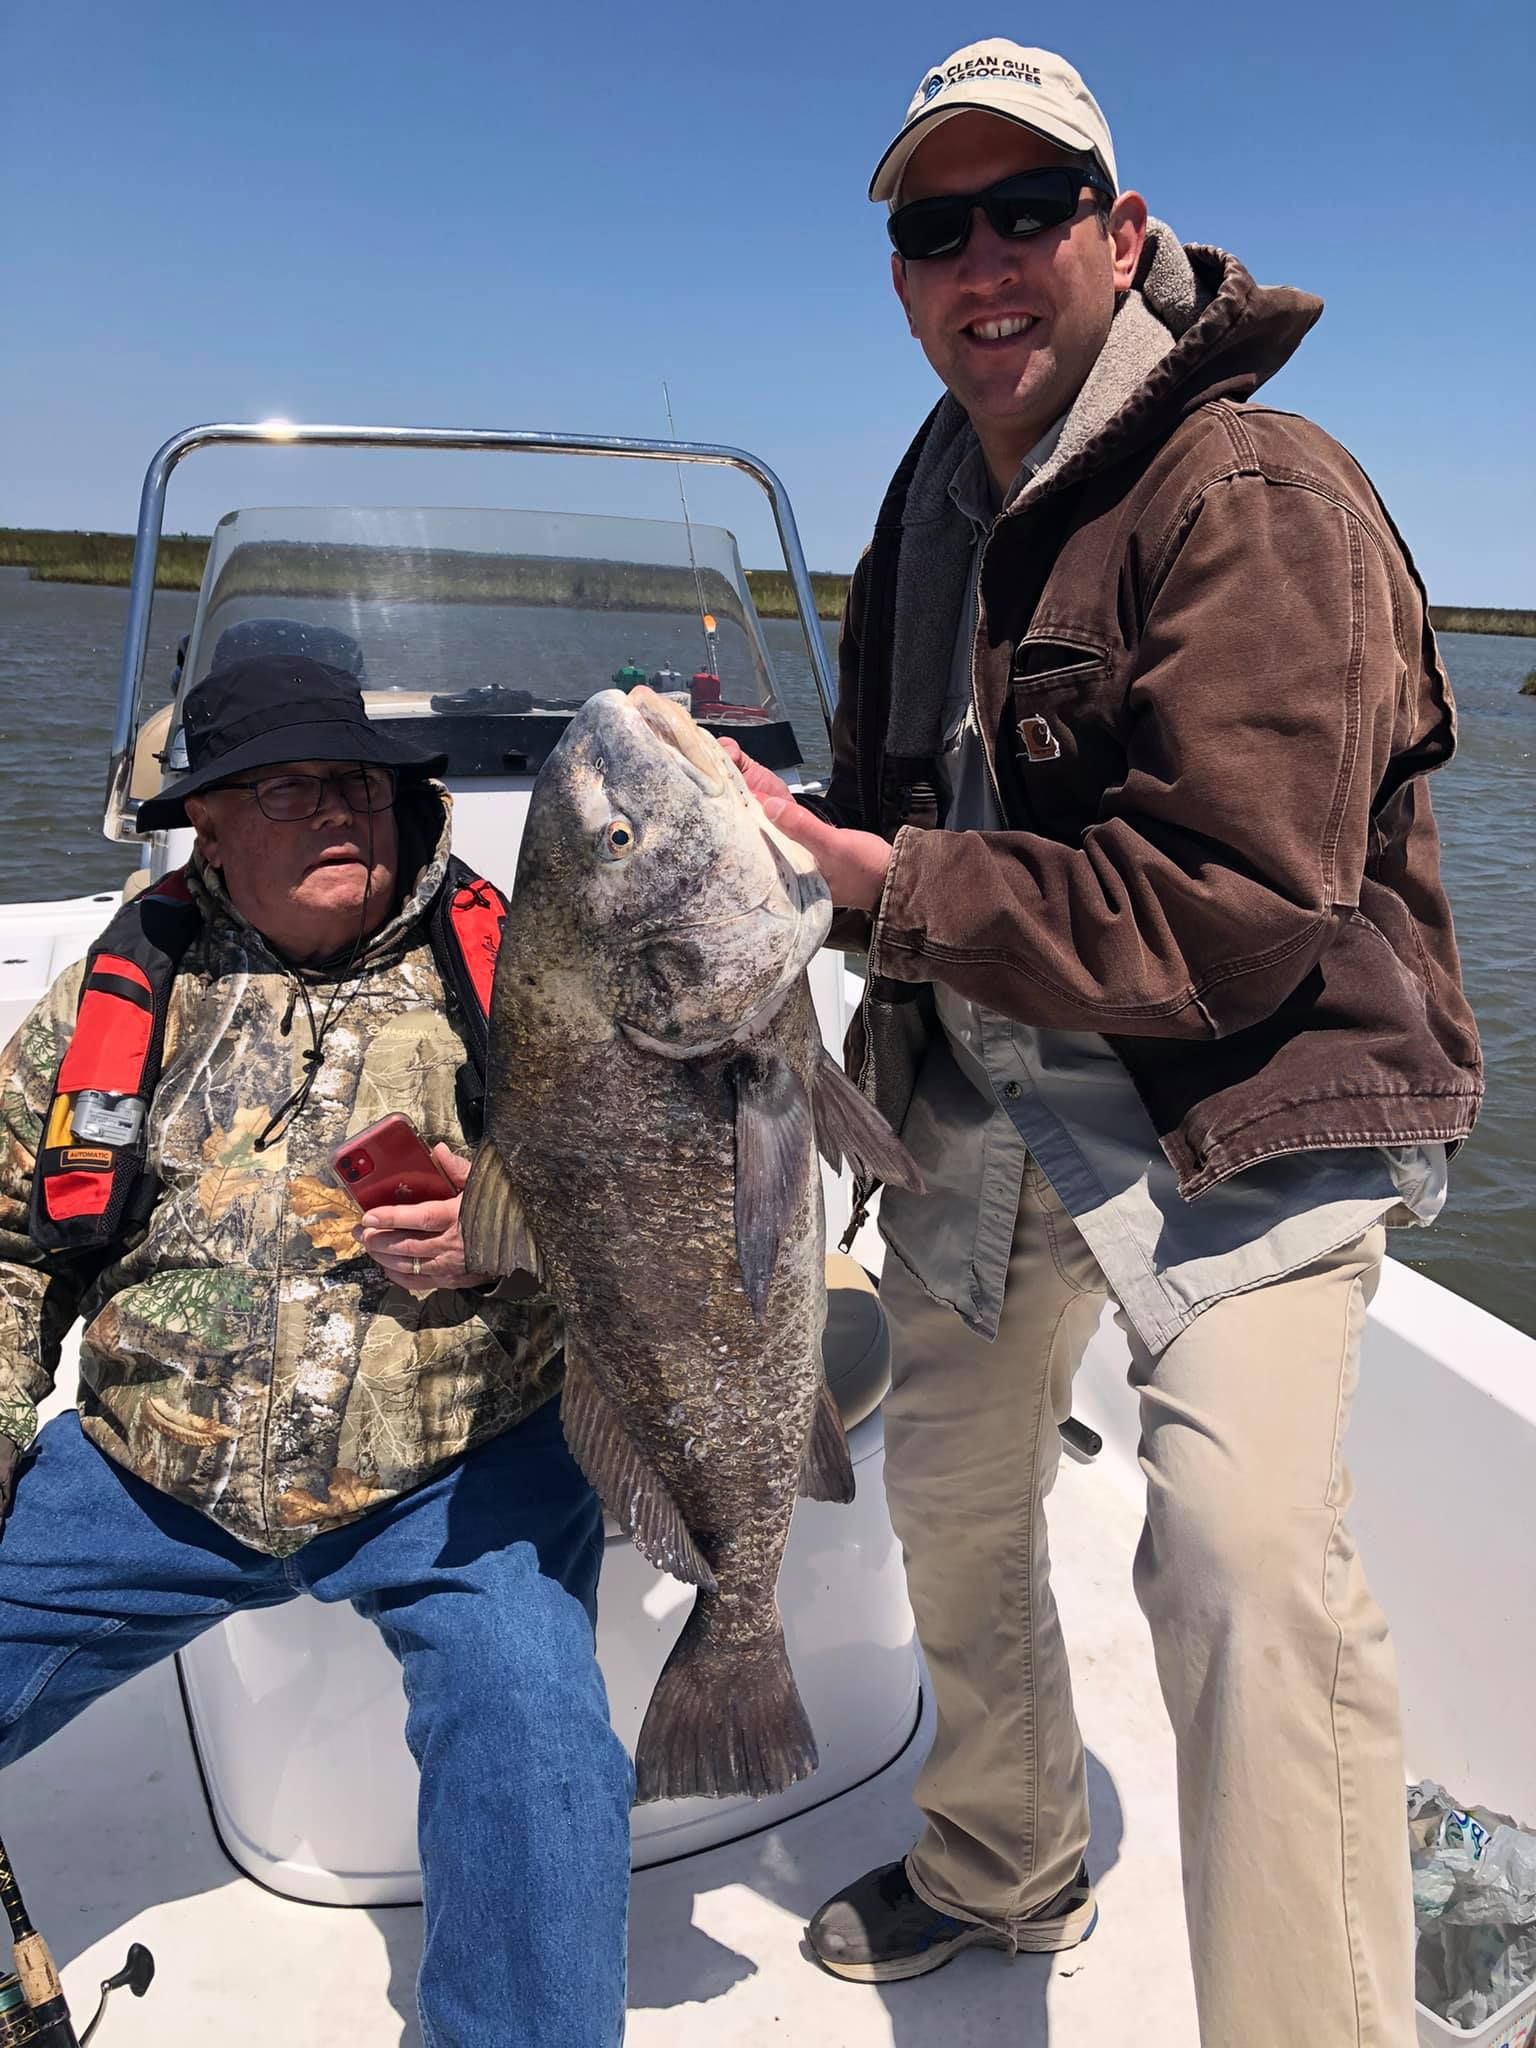 amazing trip with Get'n Hooked Inshore Adventures